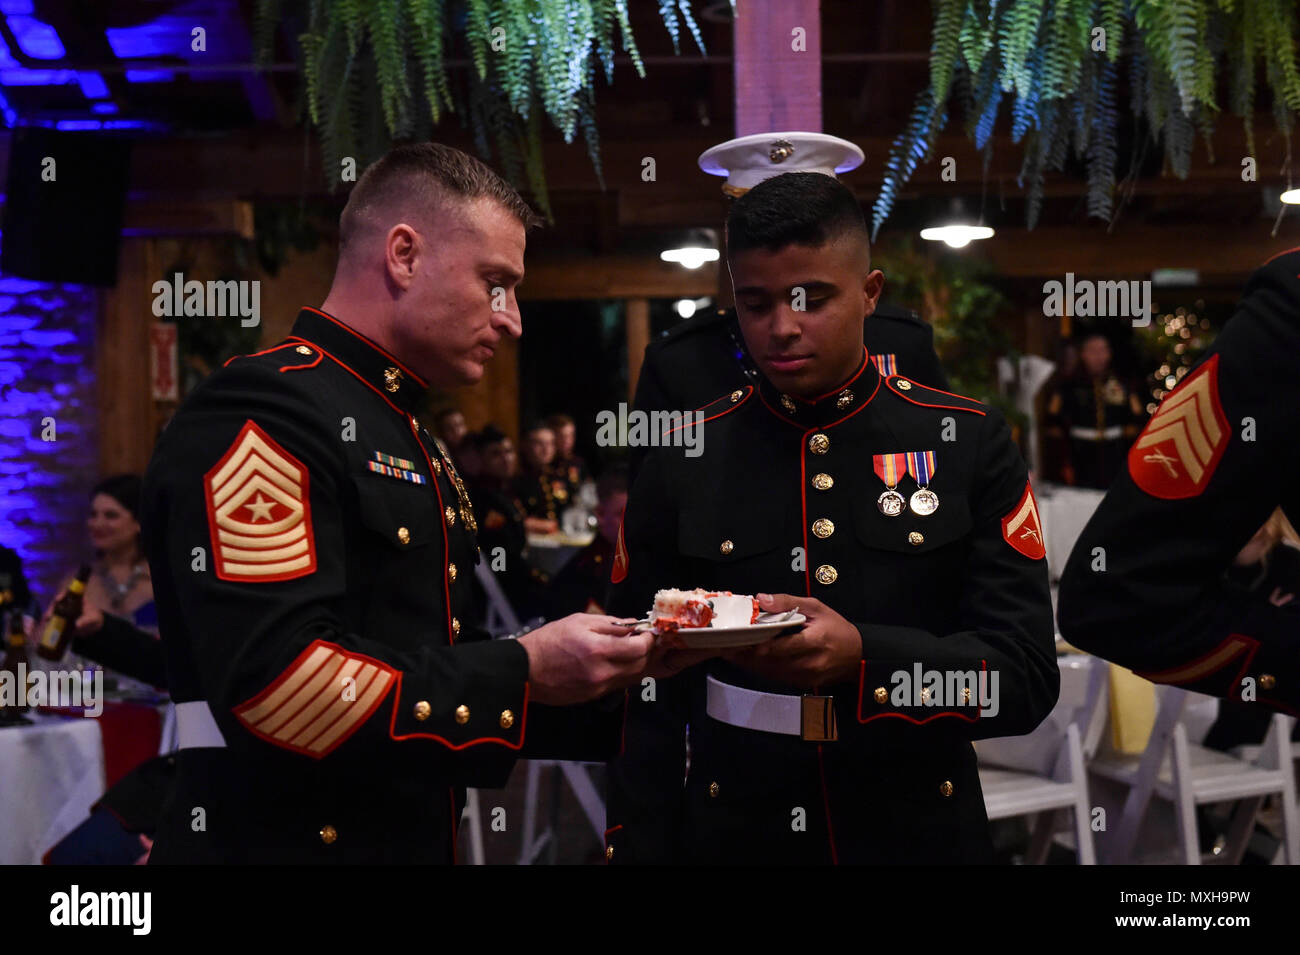 161104-N-OO032-200 POULSBO, Wash. (Nov. 4, 2016) Marine Corps Security Force Battalion-Bangor Command Sgt. Maj. David McKinley, the oldest Marine in attendance, shares a piece of cake with Pfc. Christian Pichardo, the youngest Marine in attendance, during the 241st United States Marine Corps birthday ball hosted by the battalion at the Kiana Lodge. Maj. Gen. John Lejeune issued General Order 47 on November 1, 1921, for Marines to commemorate the establishment of the Continental Marines — November 10, 1775. (U.S. Navy photo by Petty Officer 1st Class Cory Asato/Released) Stock Photo